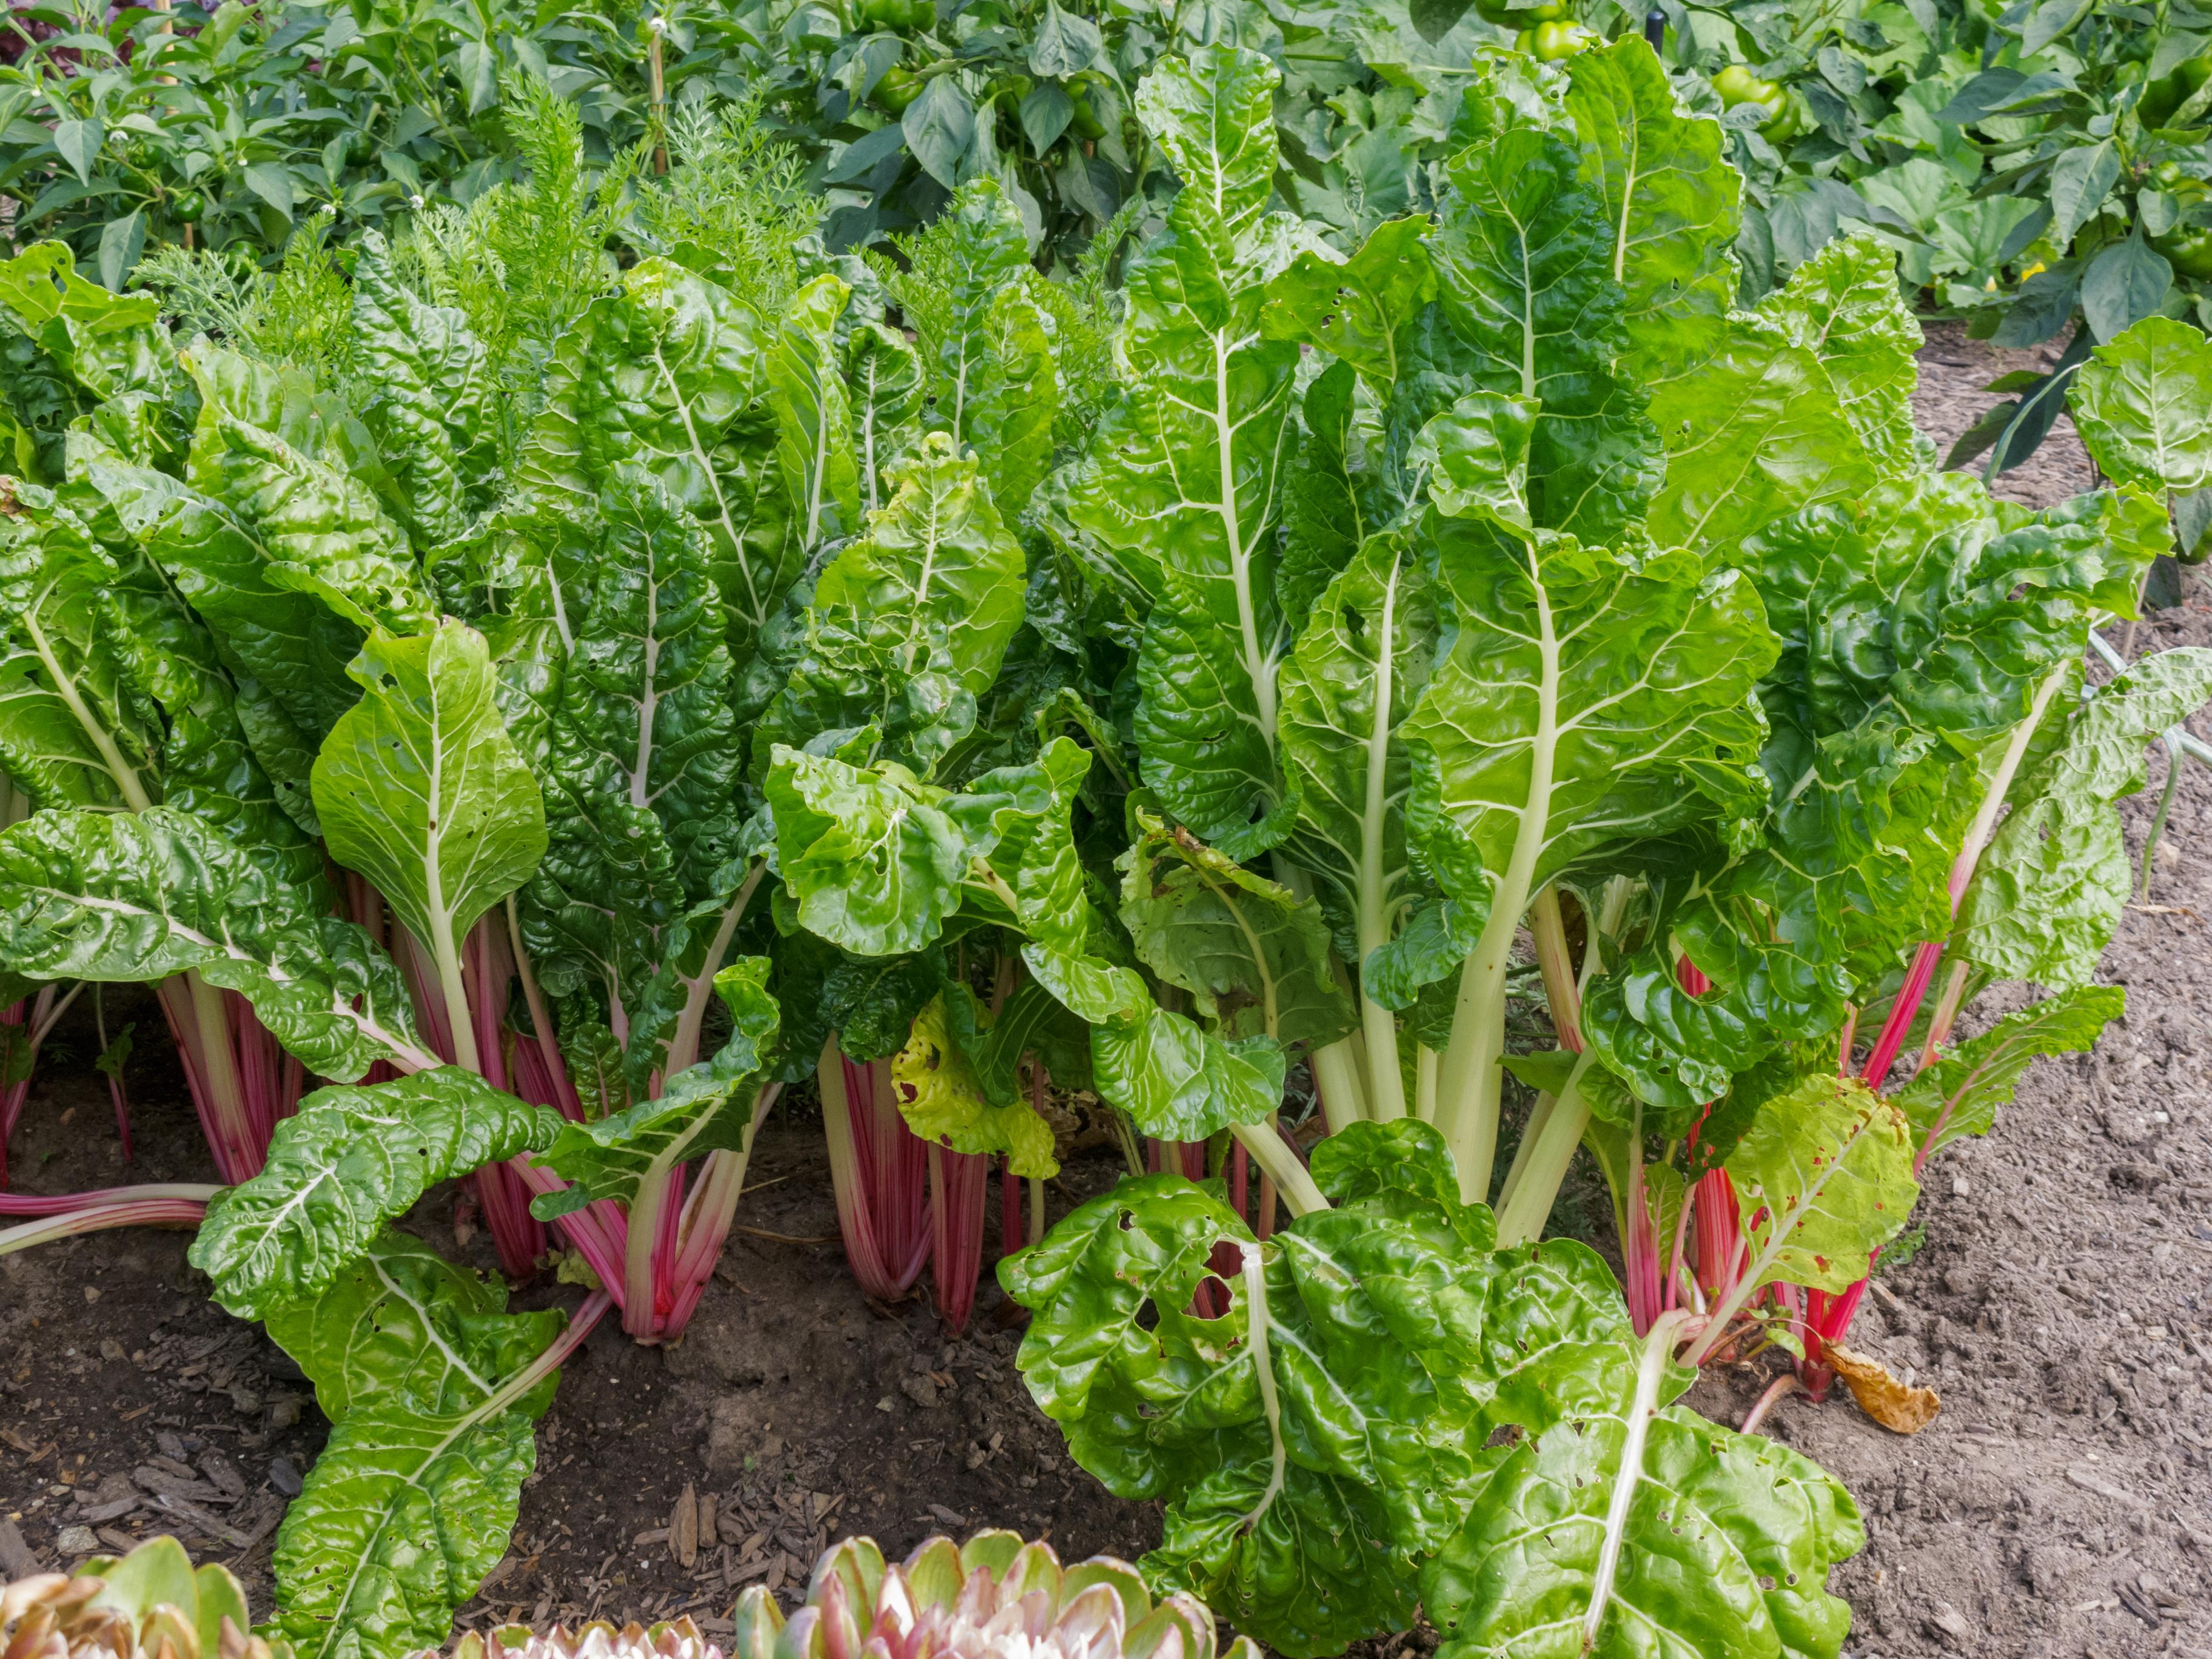 Swiss chard growing in a vegetable bed